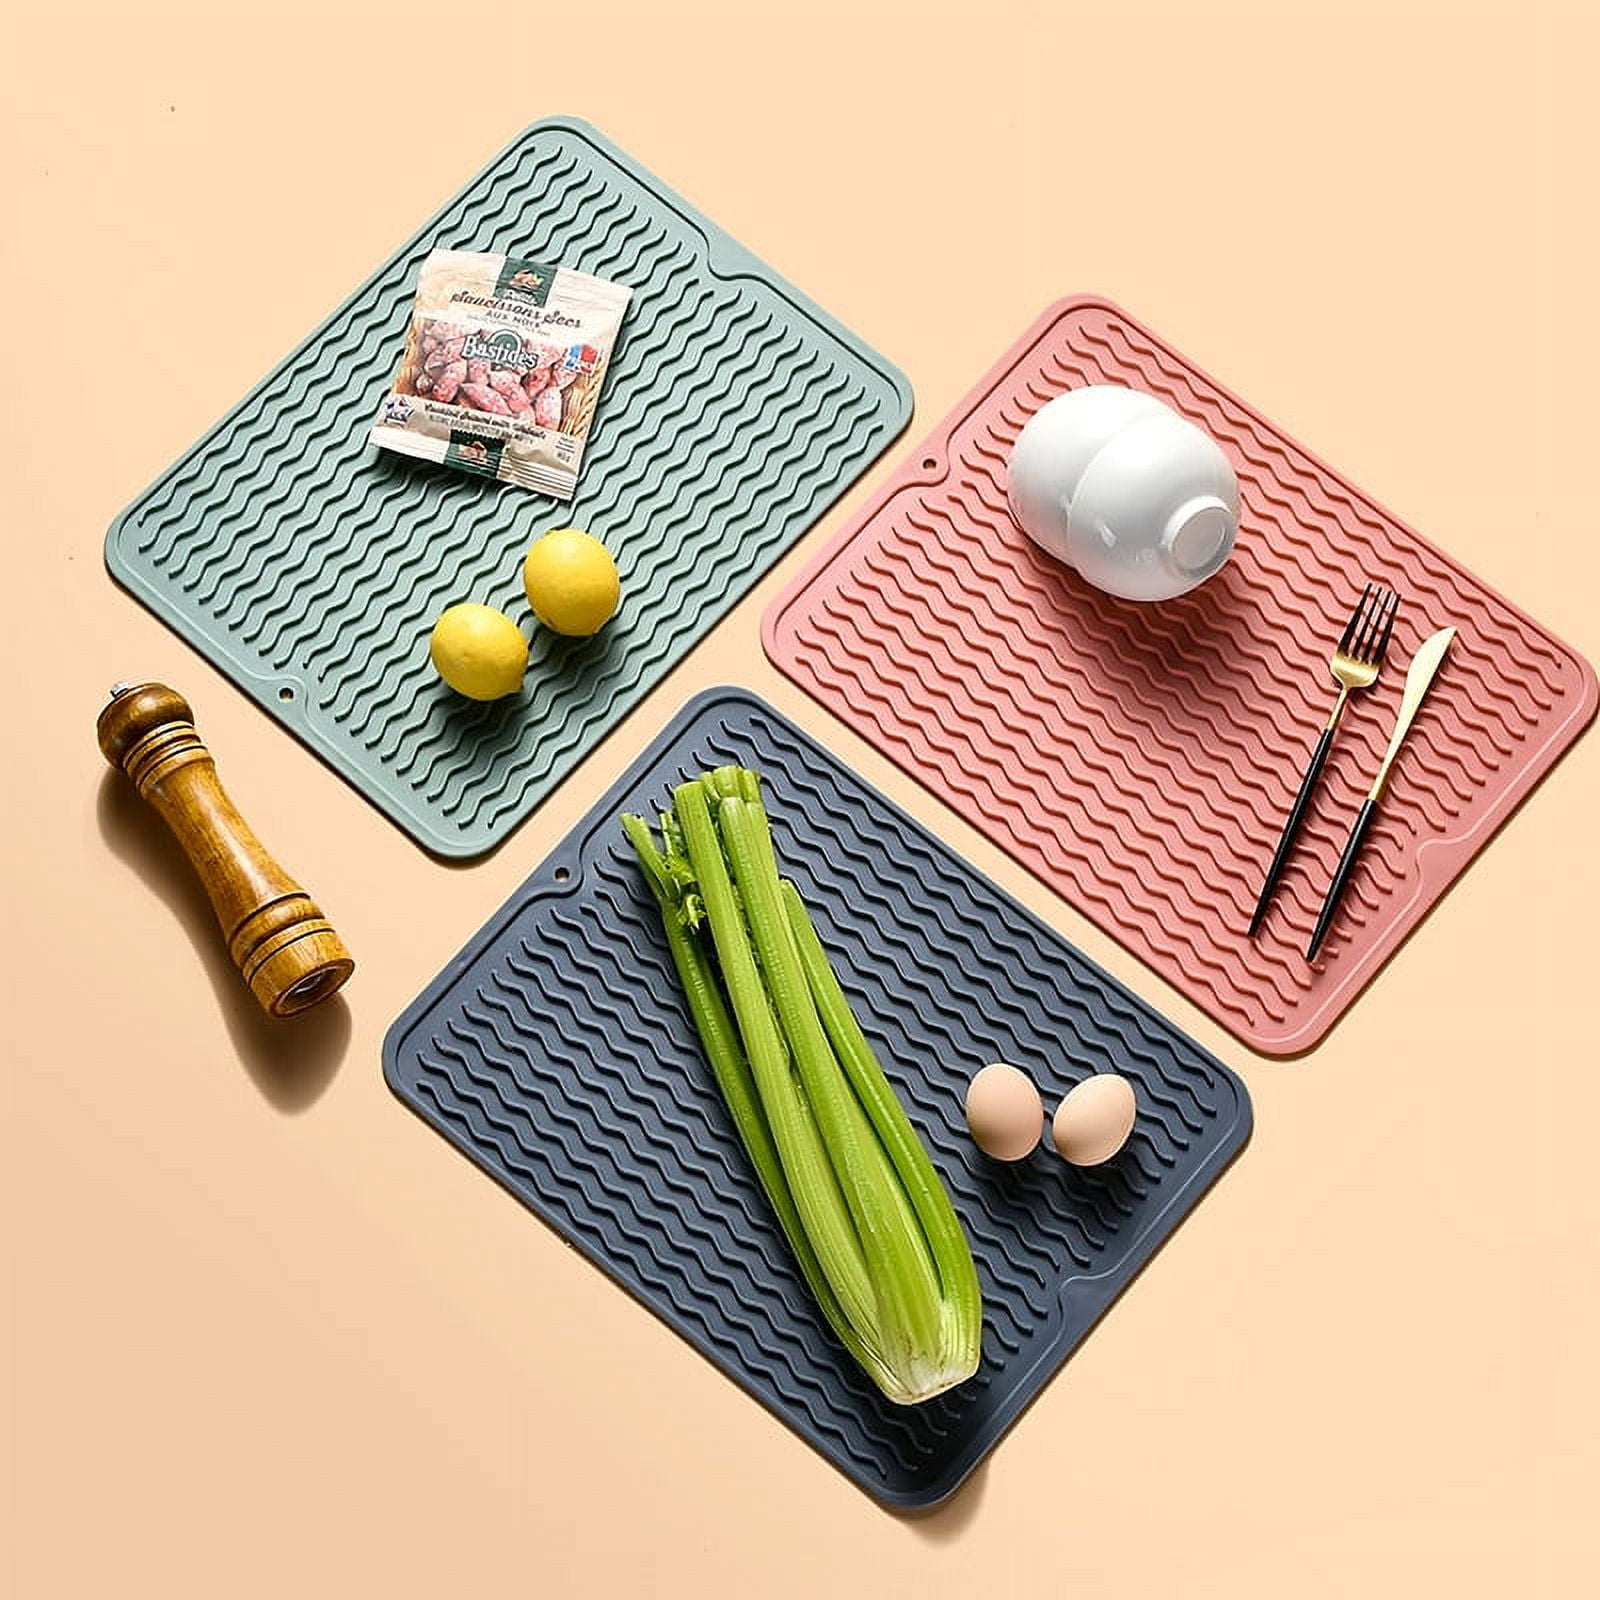 Visland Silicone Trivet Mat Hot Pot Holder Driying Mat for Hot Dishes, Hot Pots and Hot Pan, Non Slip Heat Resistant Hot Pads for Tables, Countertop